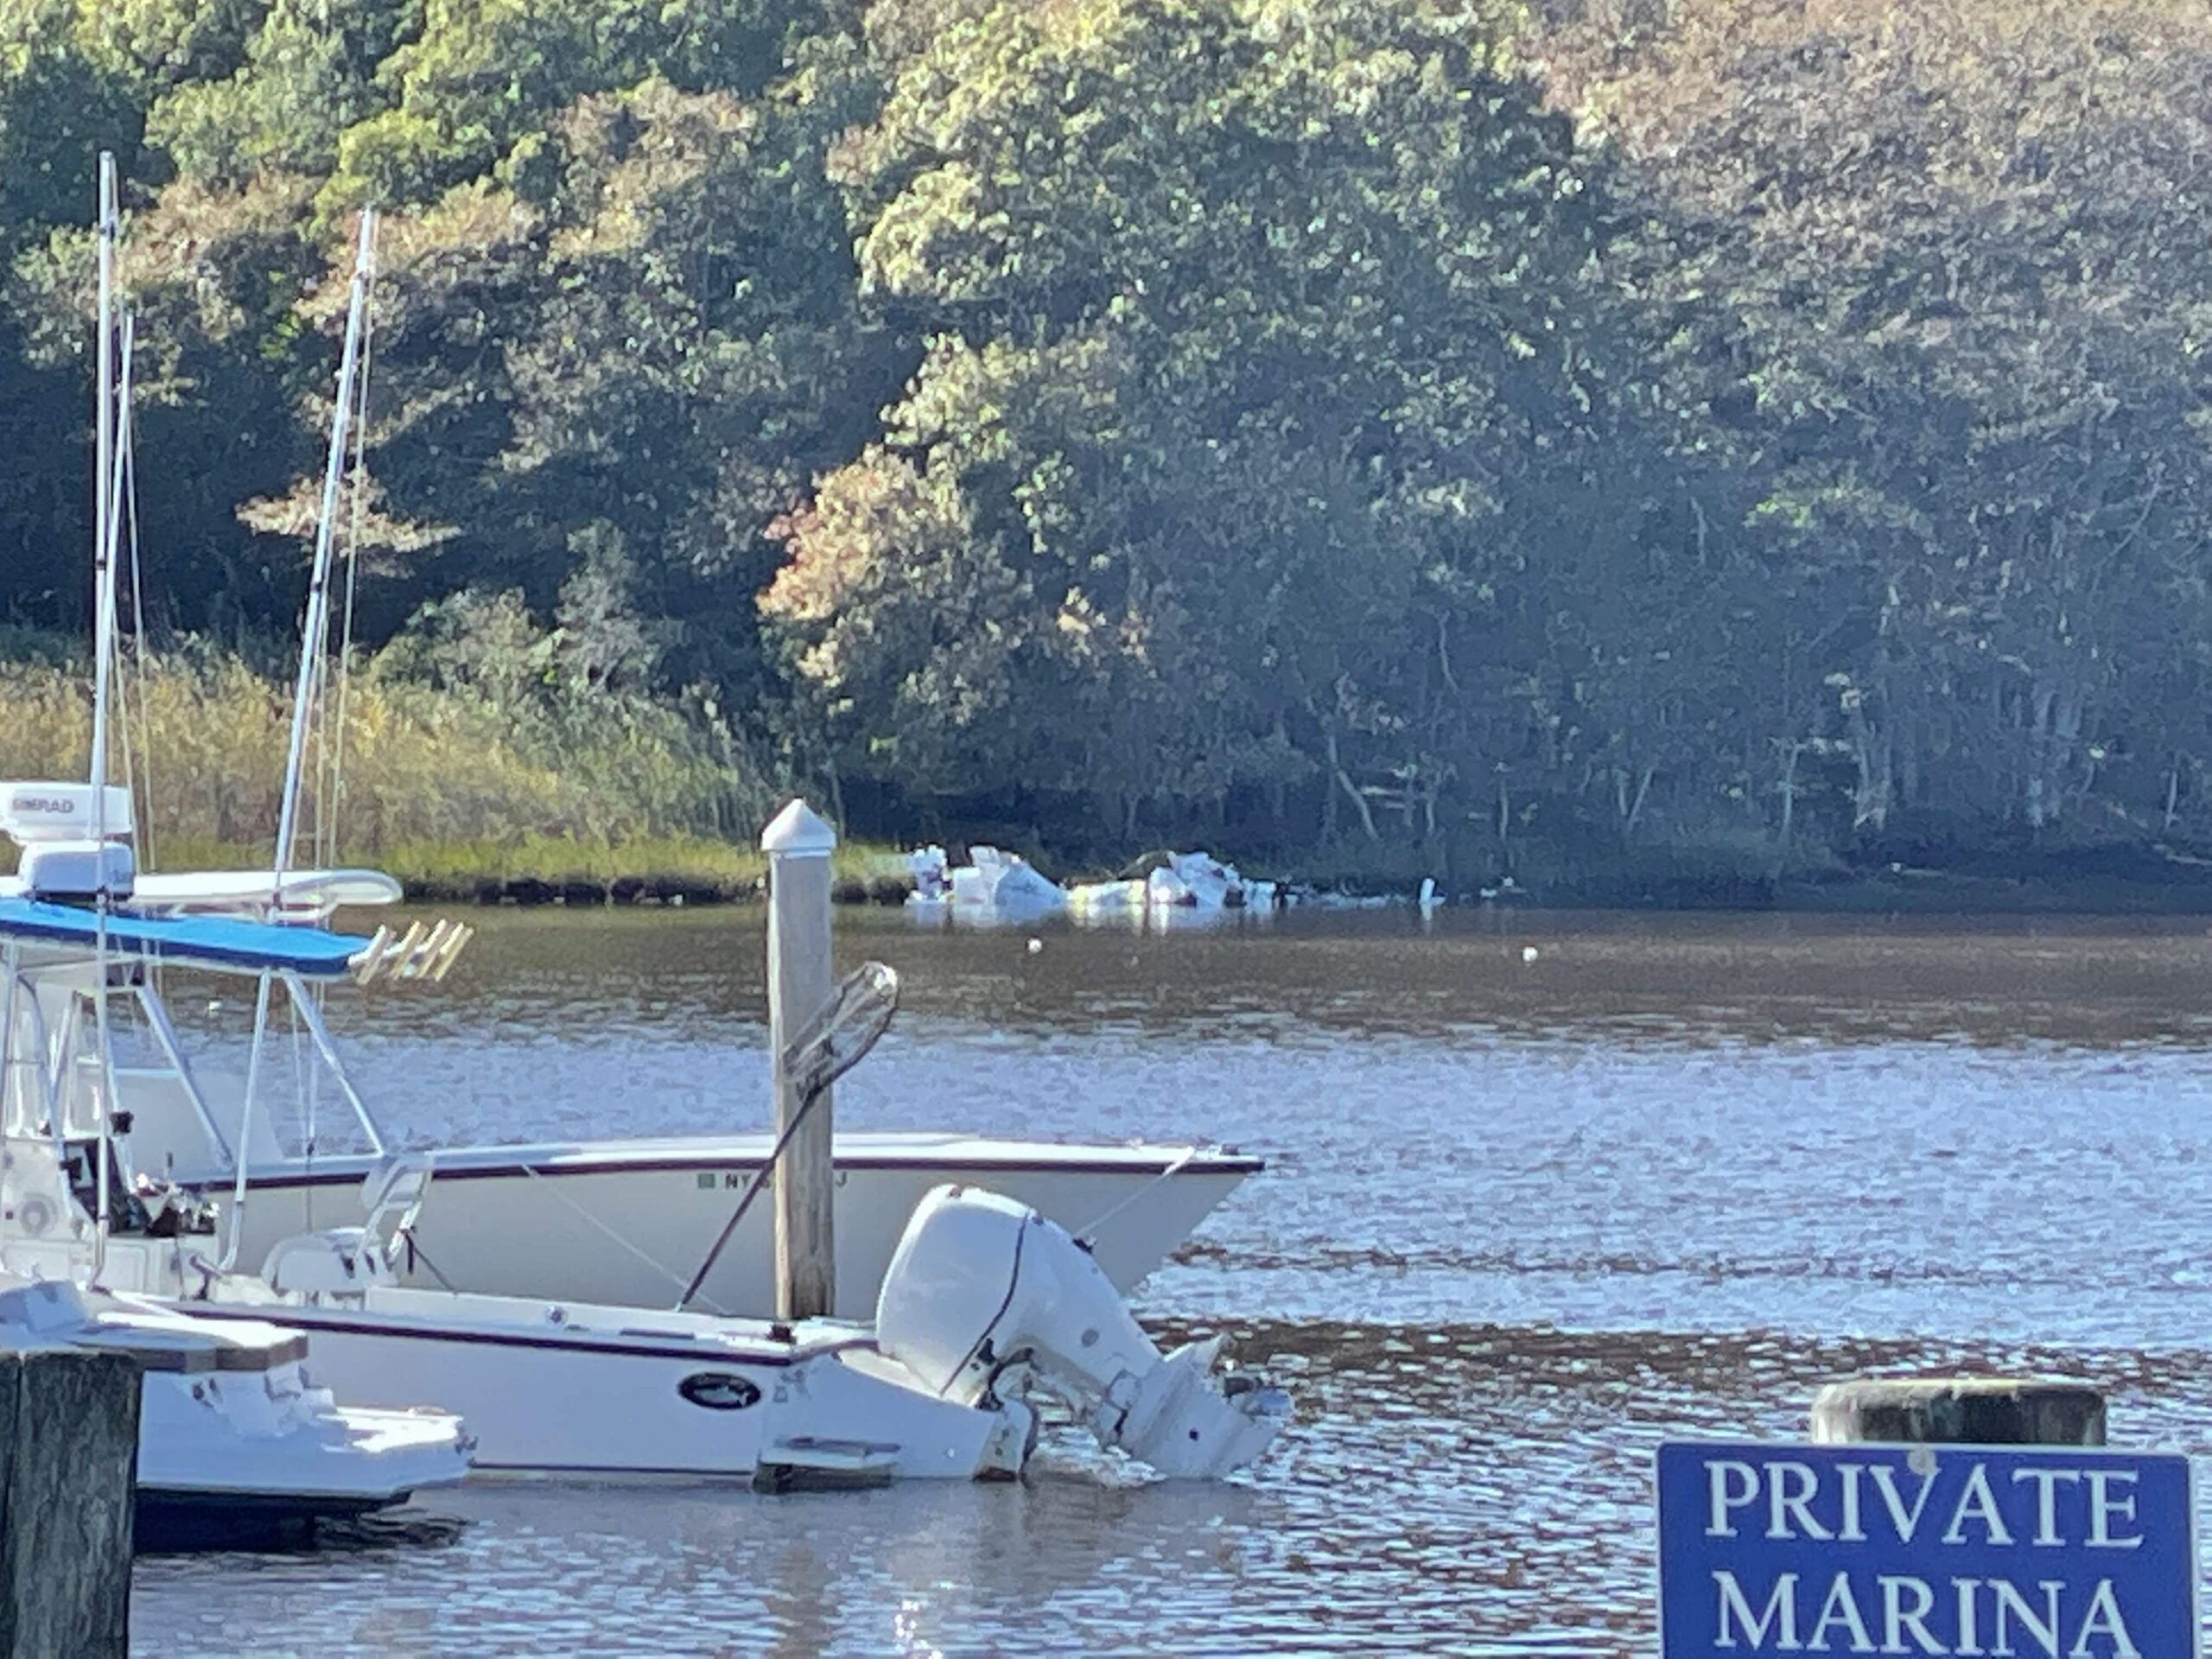 A small plane crashed in the Three Mile Harbor area of East Hampton Town, according to Town Police